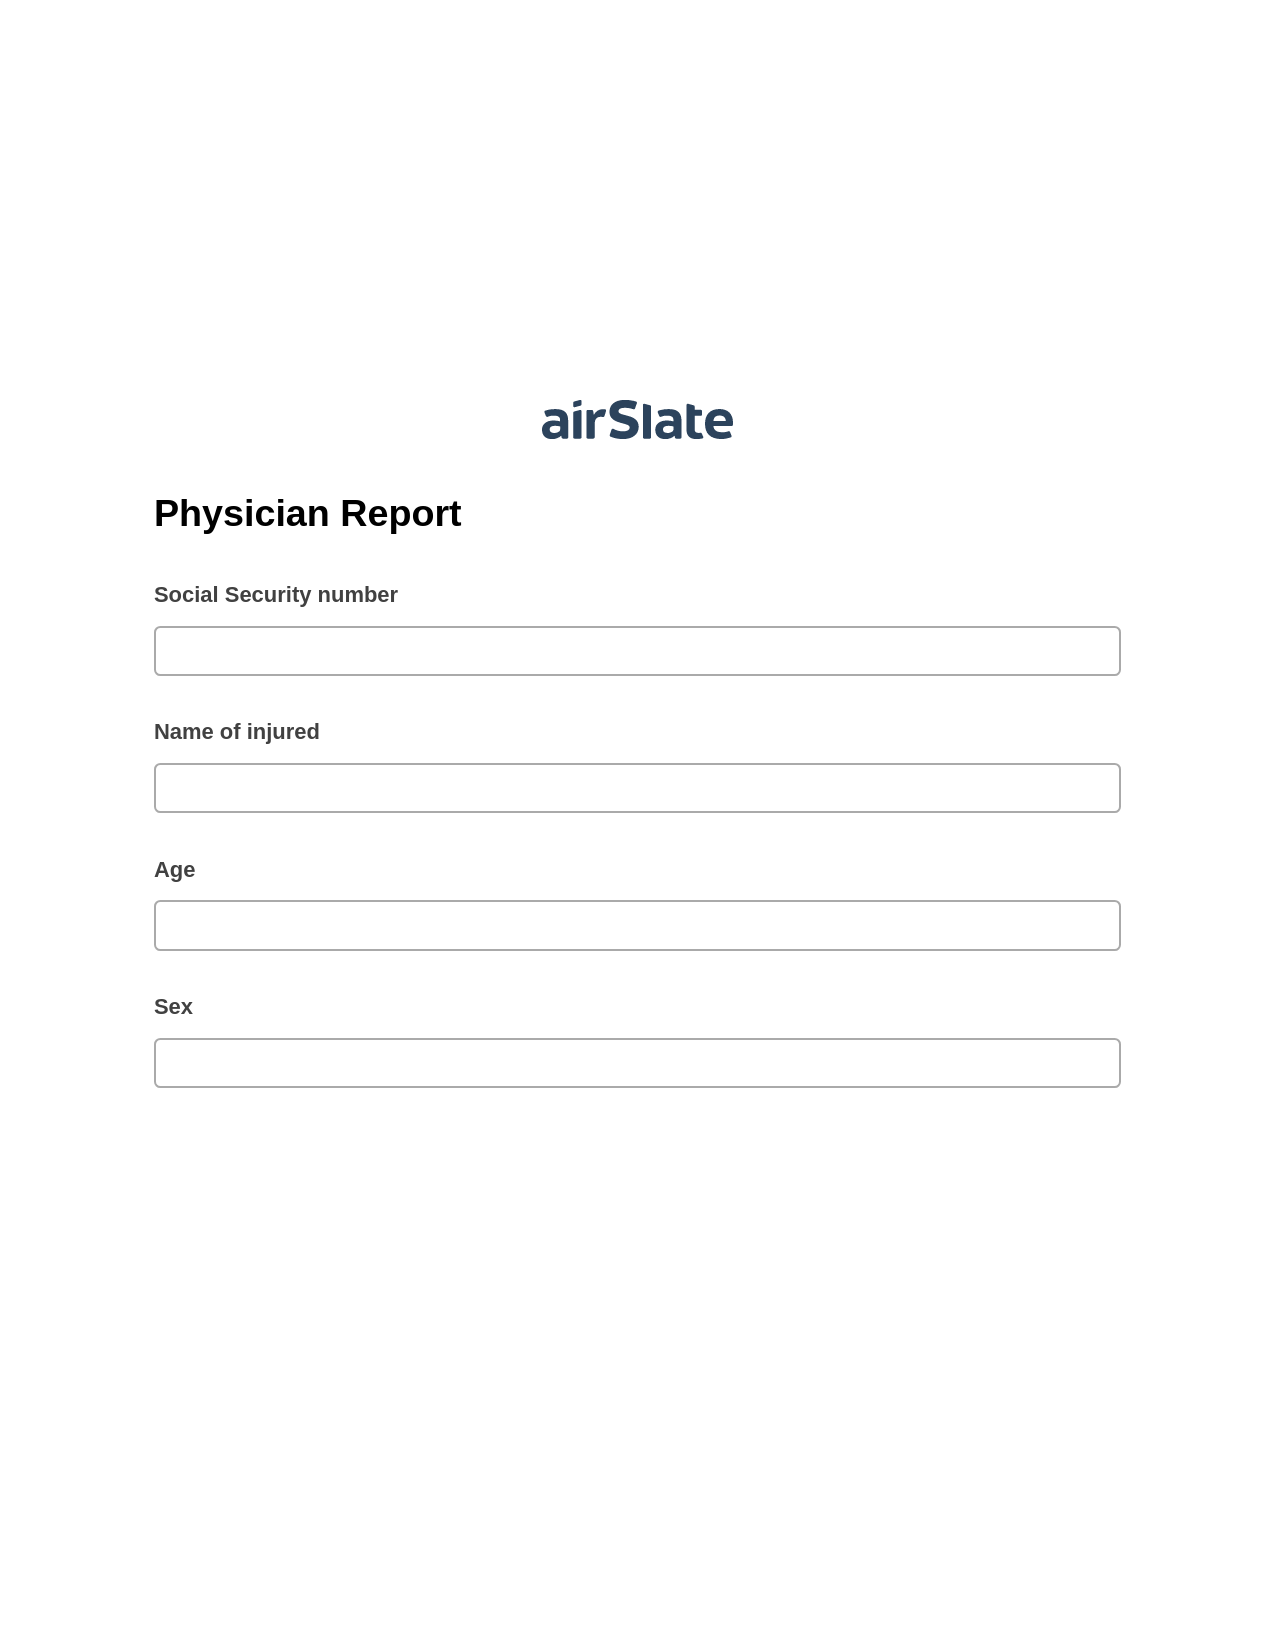 Physician Report Pre-fill Dropdowns from Airtable, Export to MS Dynamics 365 Bot, Export to Excel 365 Bot